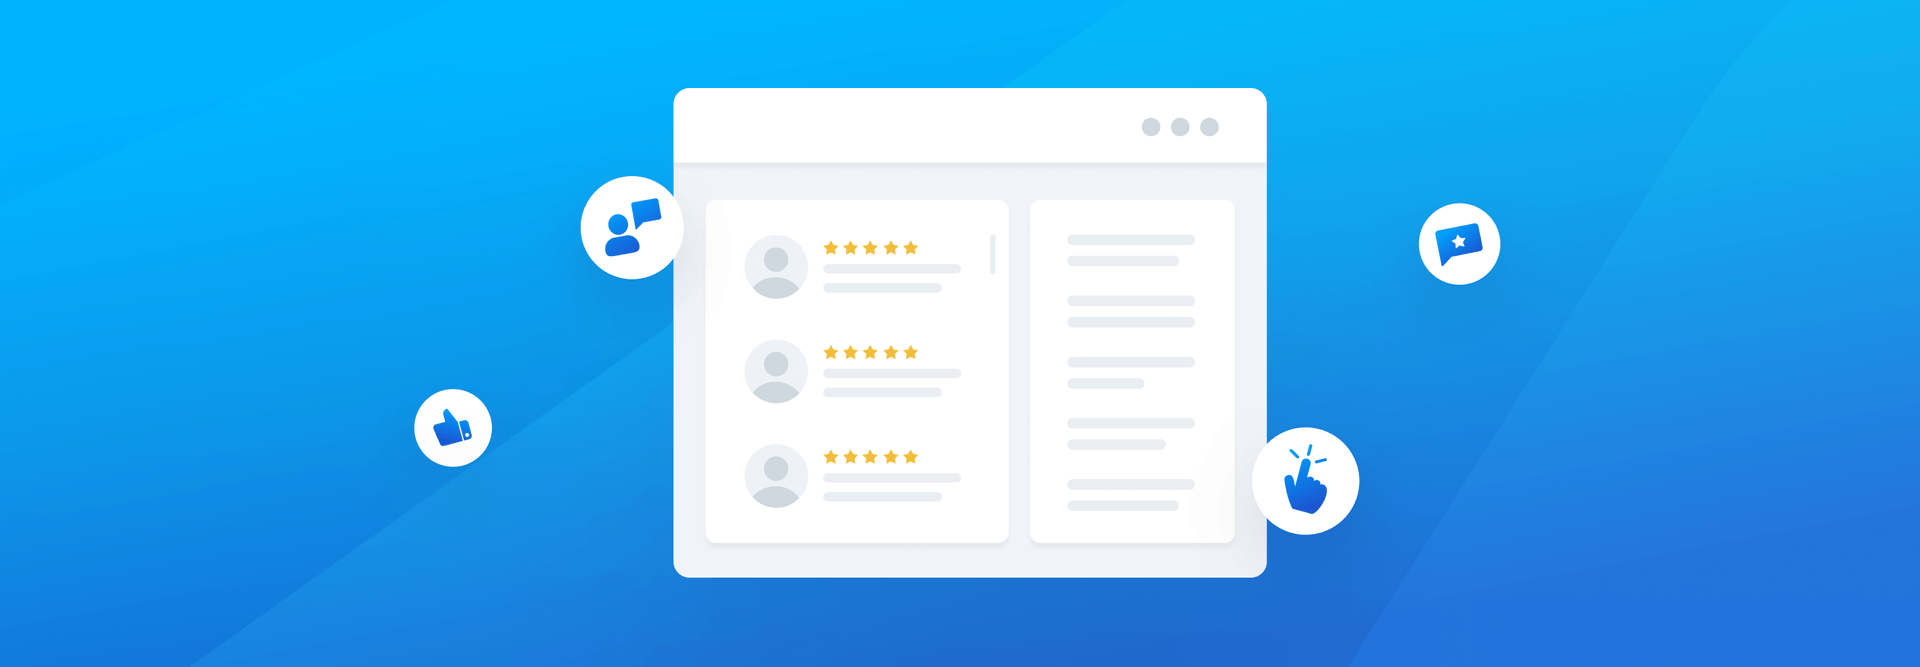 What are customer reviews